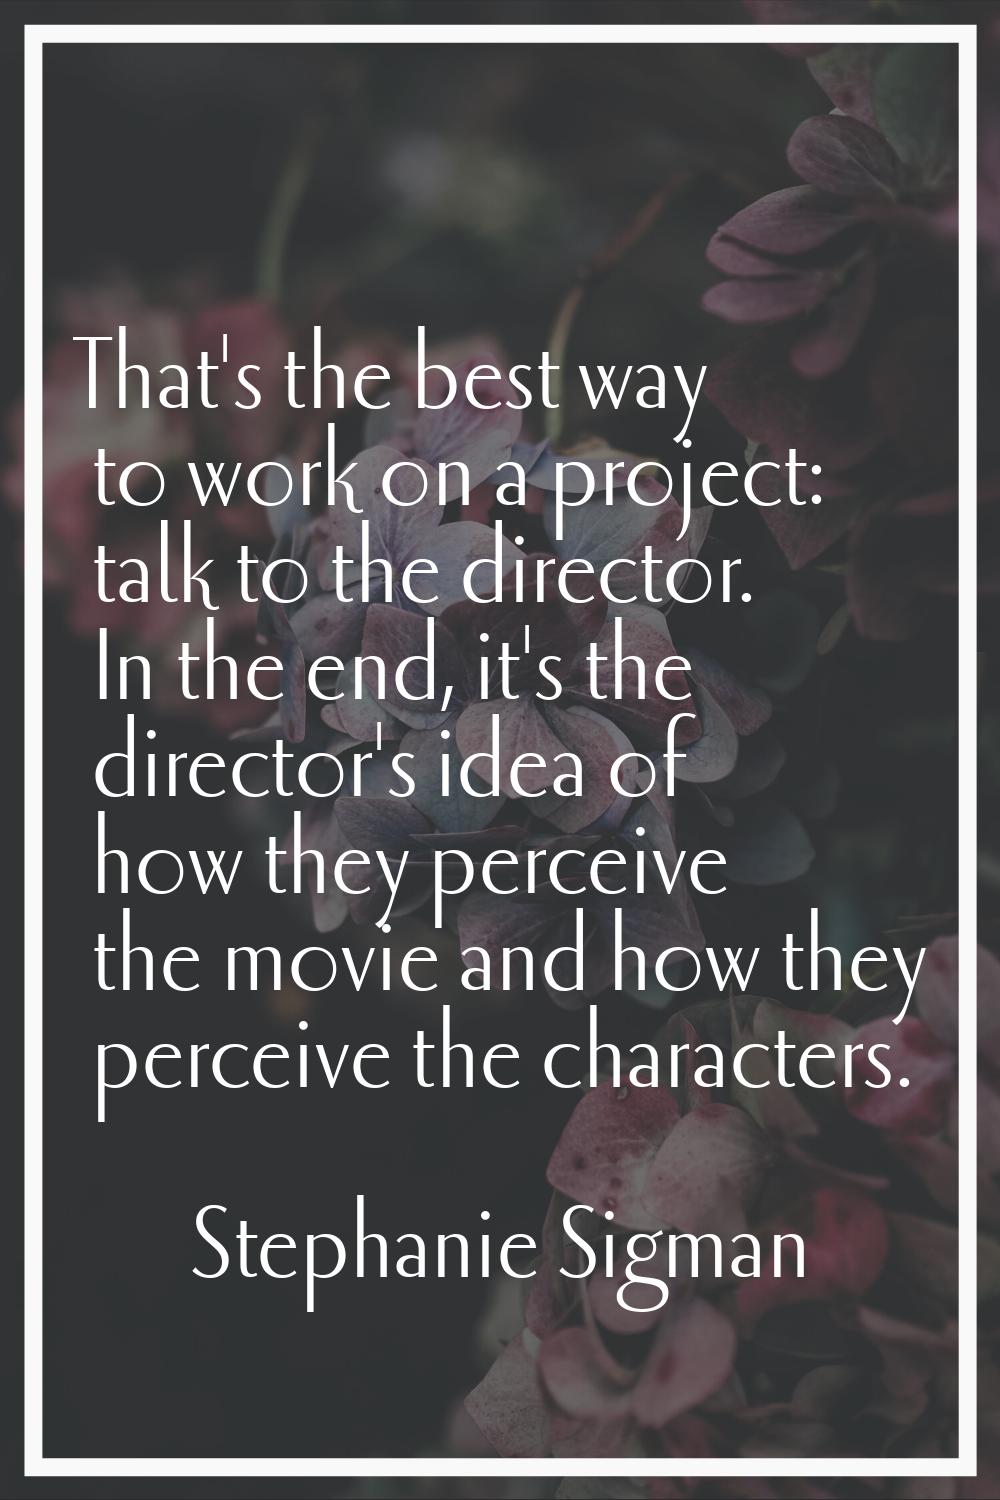 That's the best way to work on a project: talk to the director. In the end, it's the director's ide